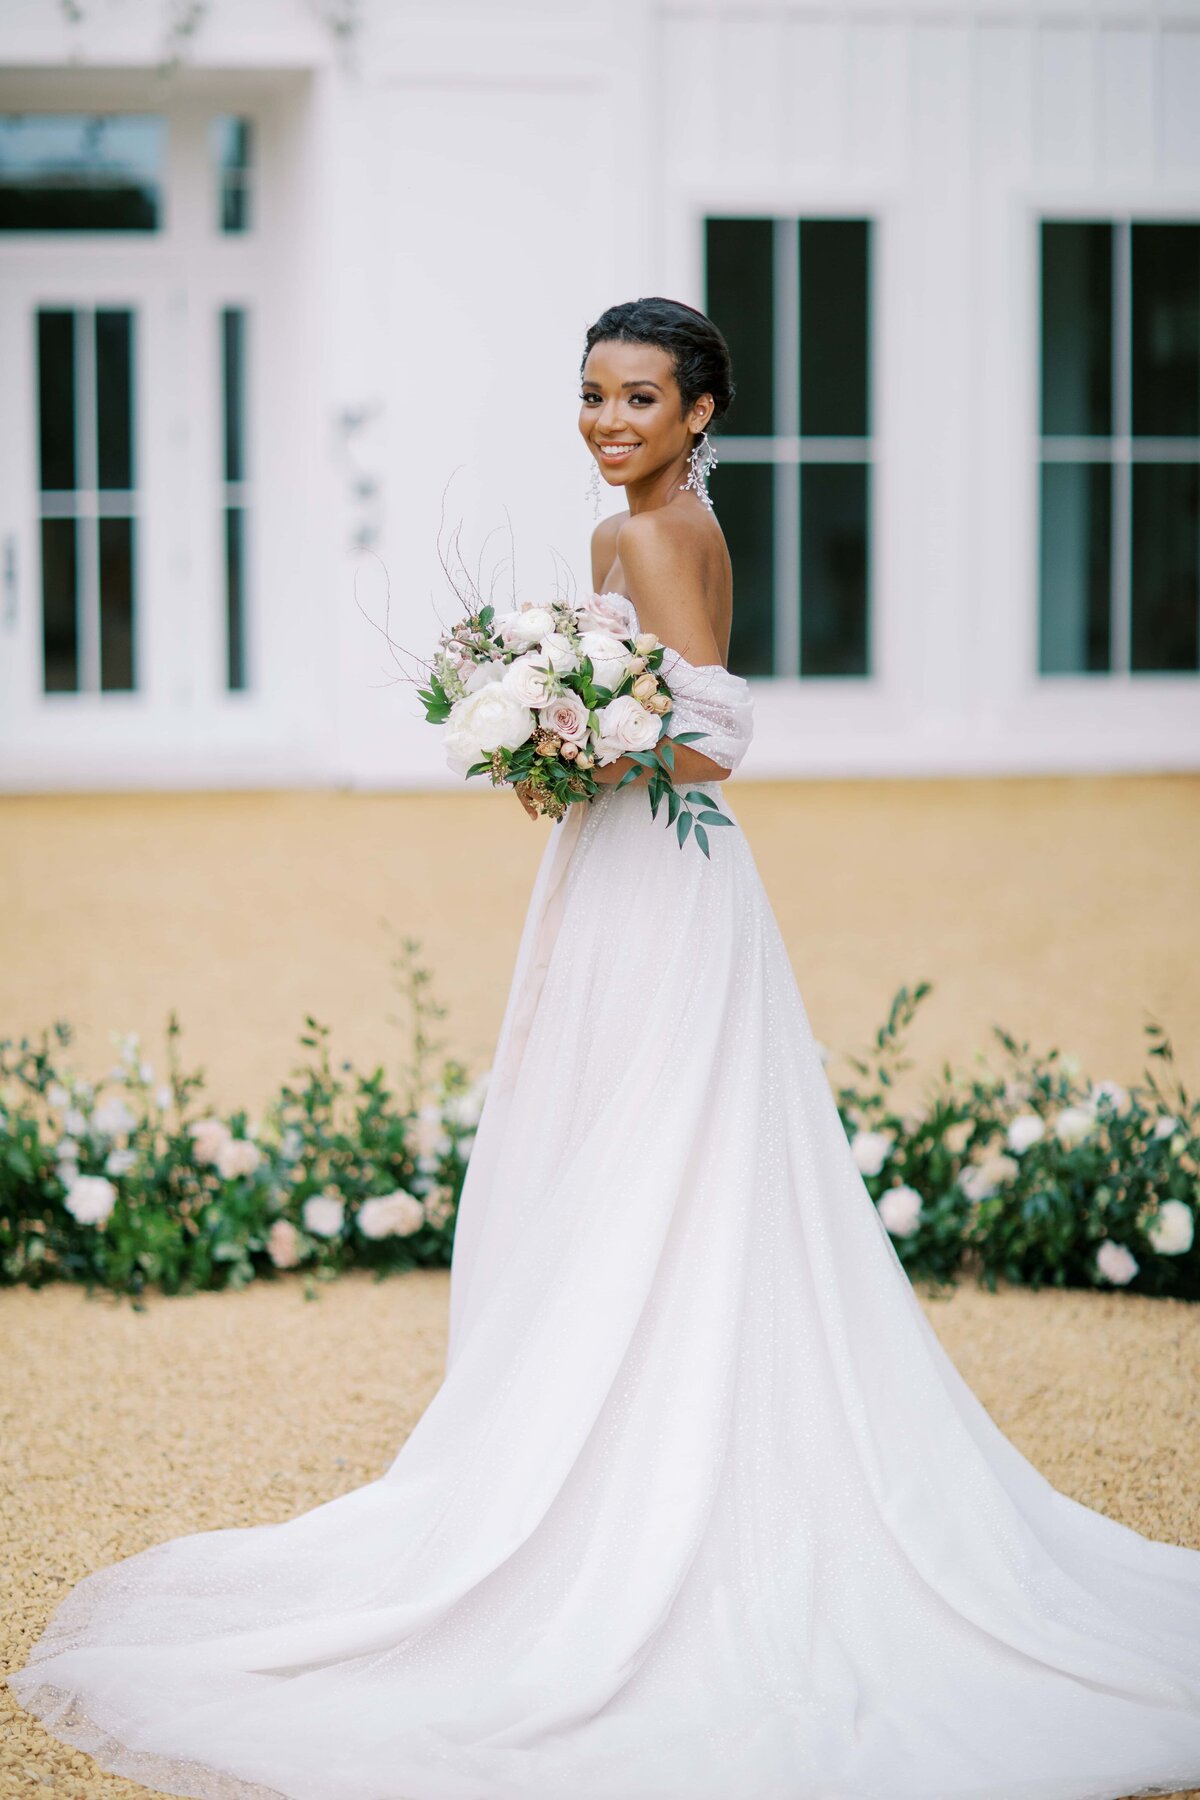 Smiling black bride in a gorgeous wedding gown holding a bouquet of white and pink flowers in front of the Ivy Rose Barn